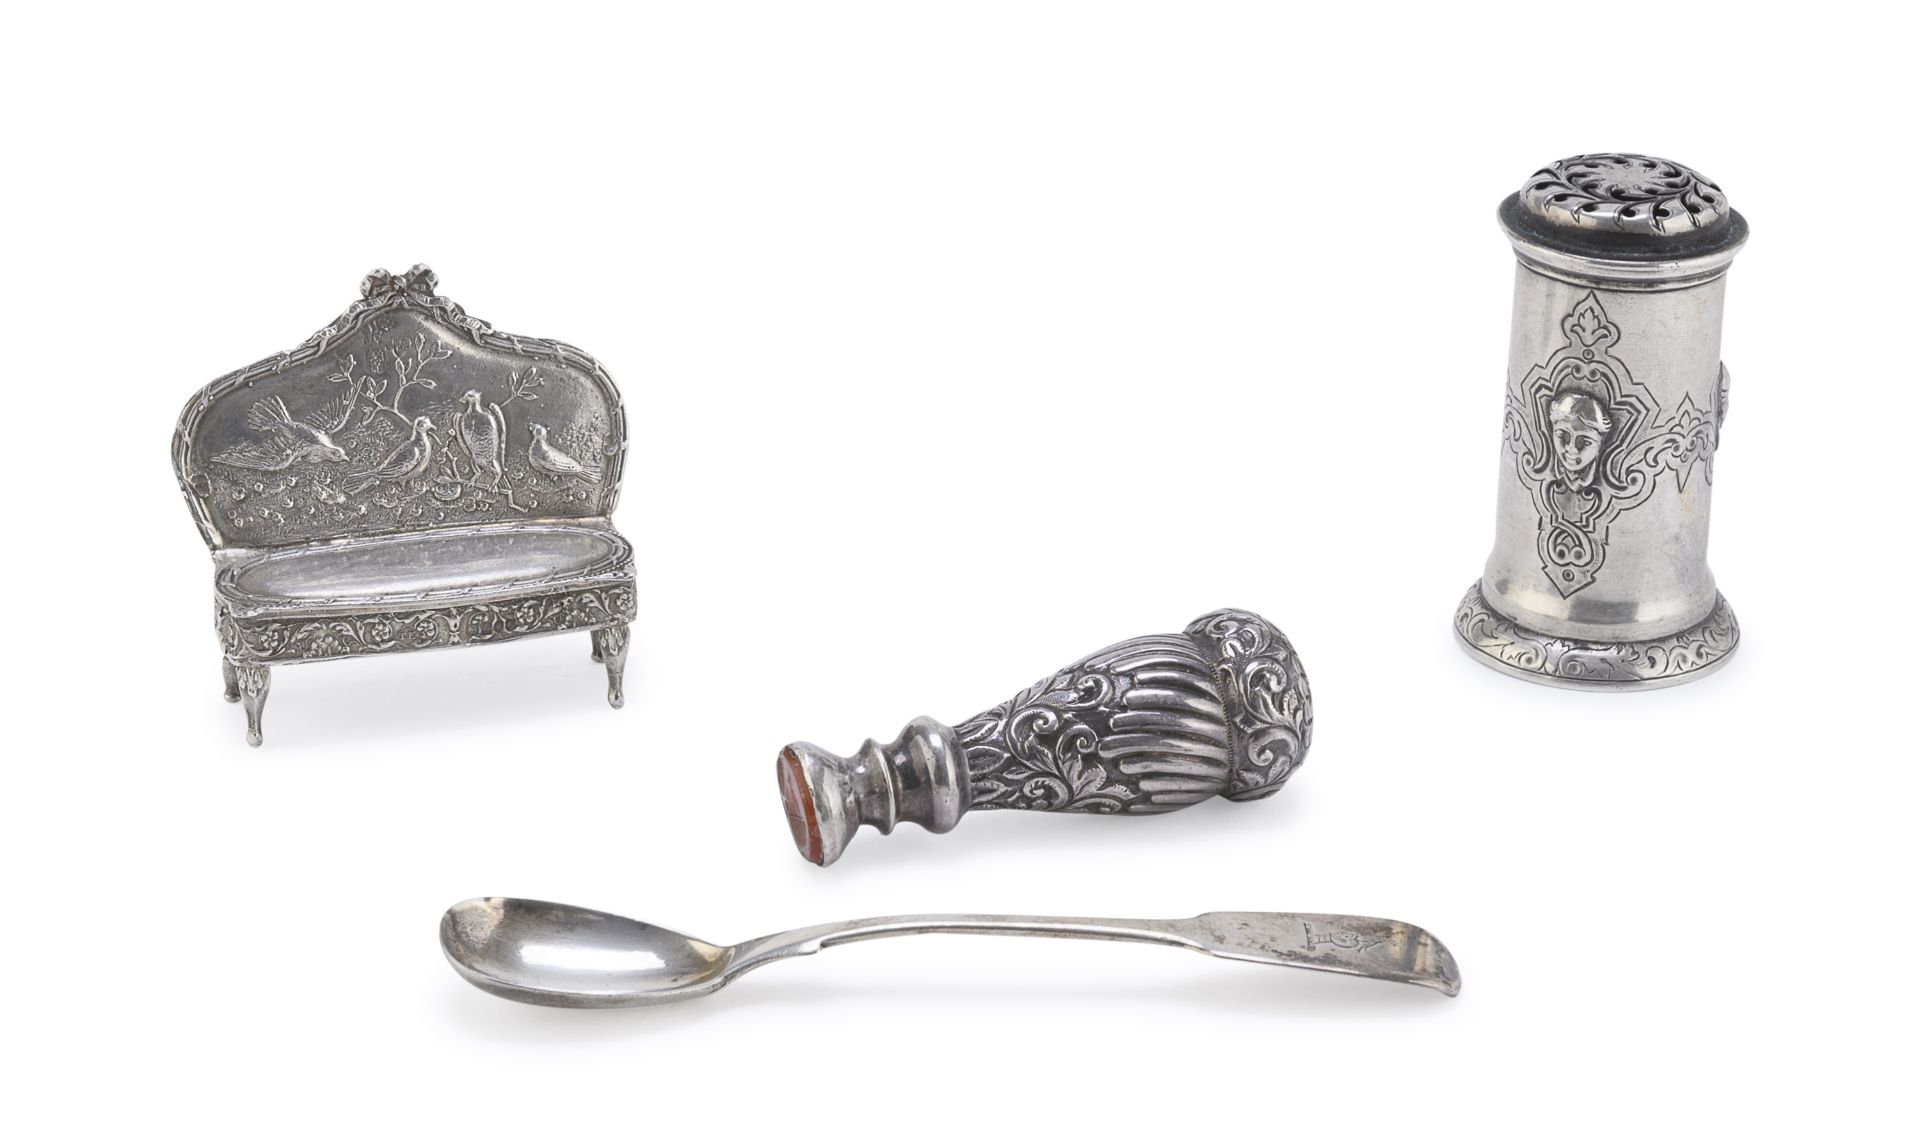 FOUR SMALL SILVER OBJECTS SOME LONDON 1838